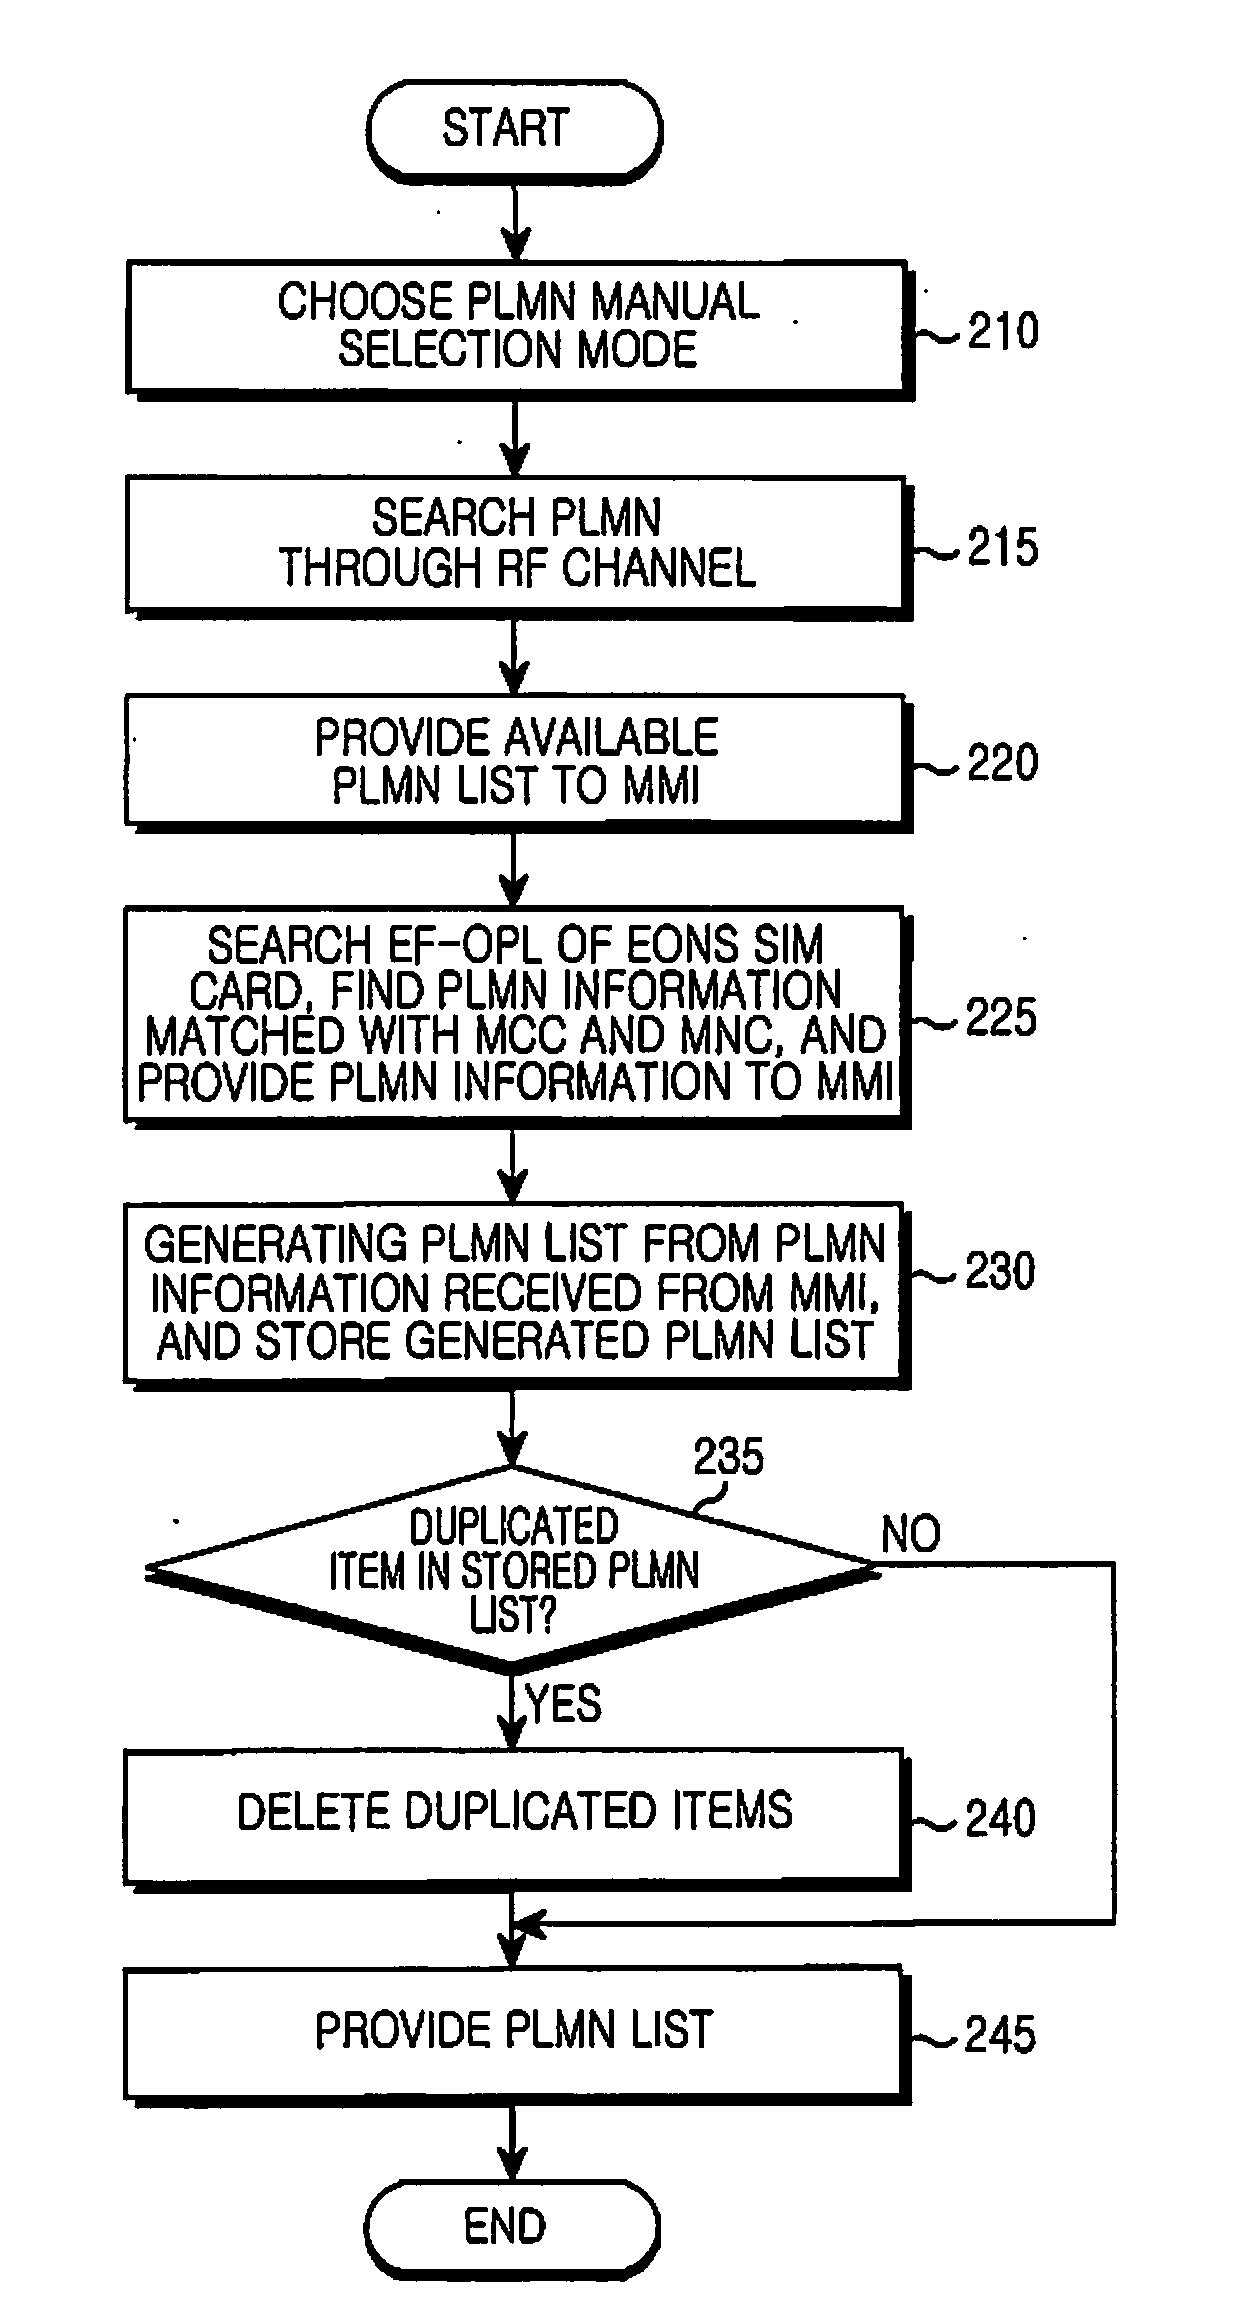 Apparatus and method for generating plmn list in mobile communication system